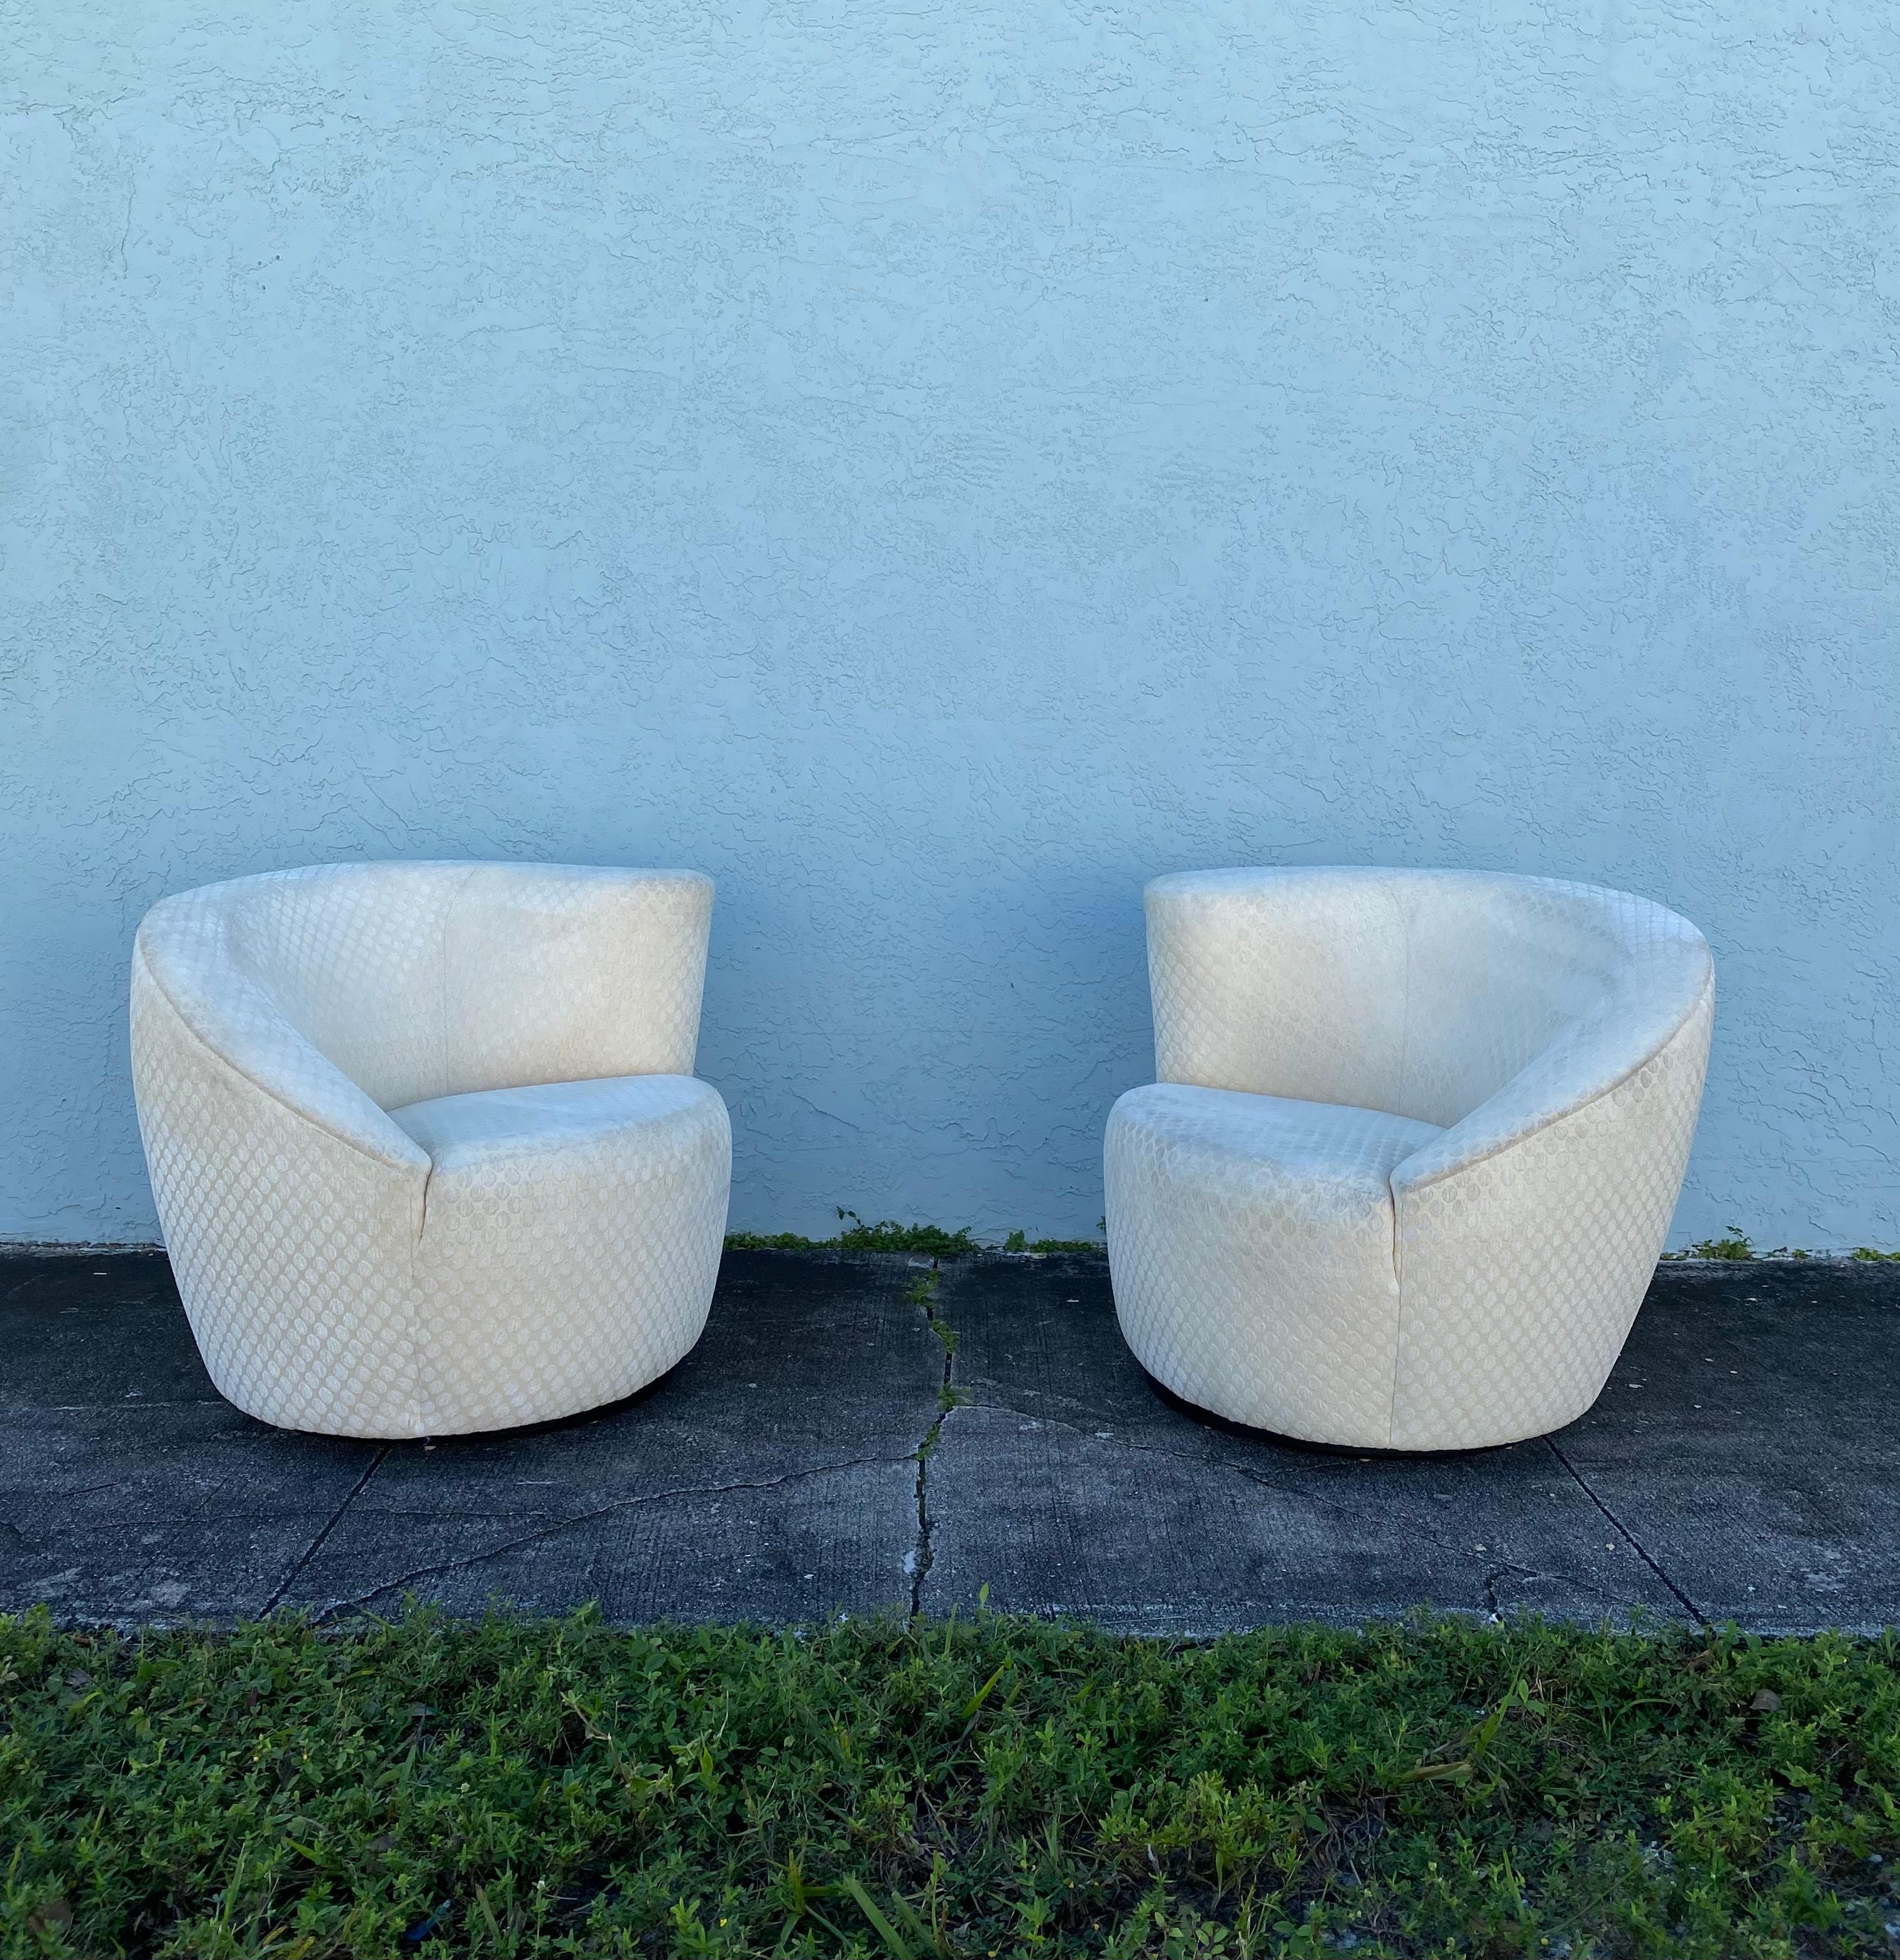 On offer on this occasion is one of the most stunning, swivel chairs set you could hope to find. Outstanding design is exhibited throughout. The beautiful set is statement piece which is also extremely comfortable and packed with personality! Firm